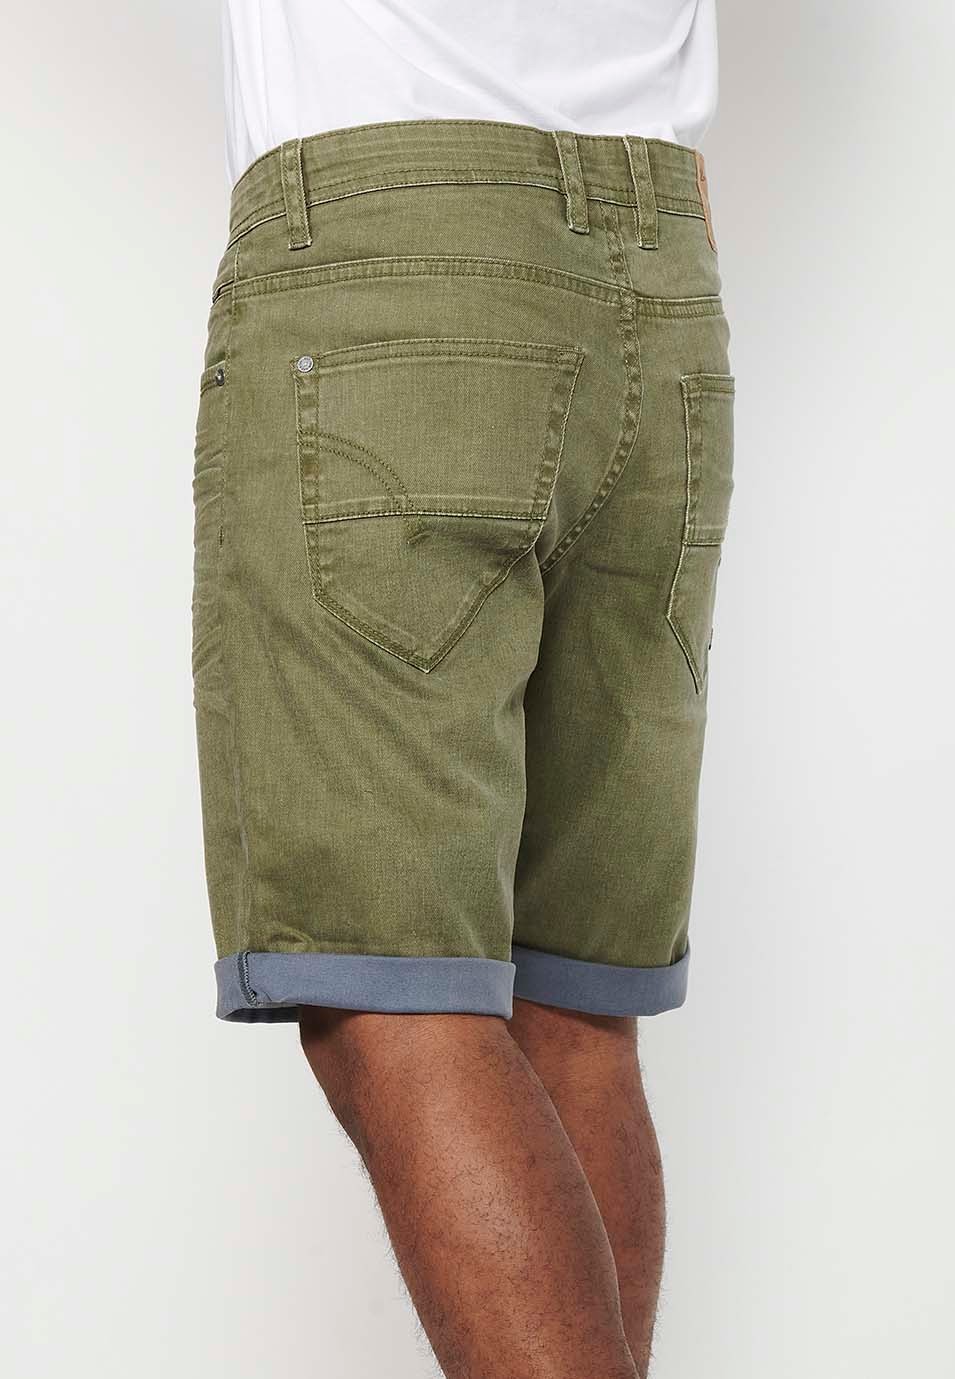 Denim Bermuda shorts with turn-up finish, front closure with zipper and button with five pockets, one pocket pocket, Olive Color for Men 6